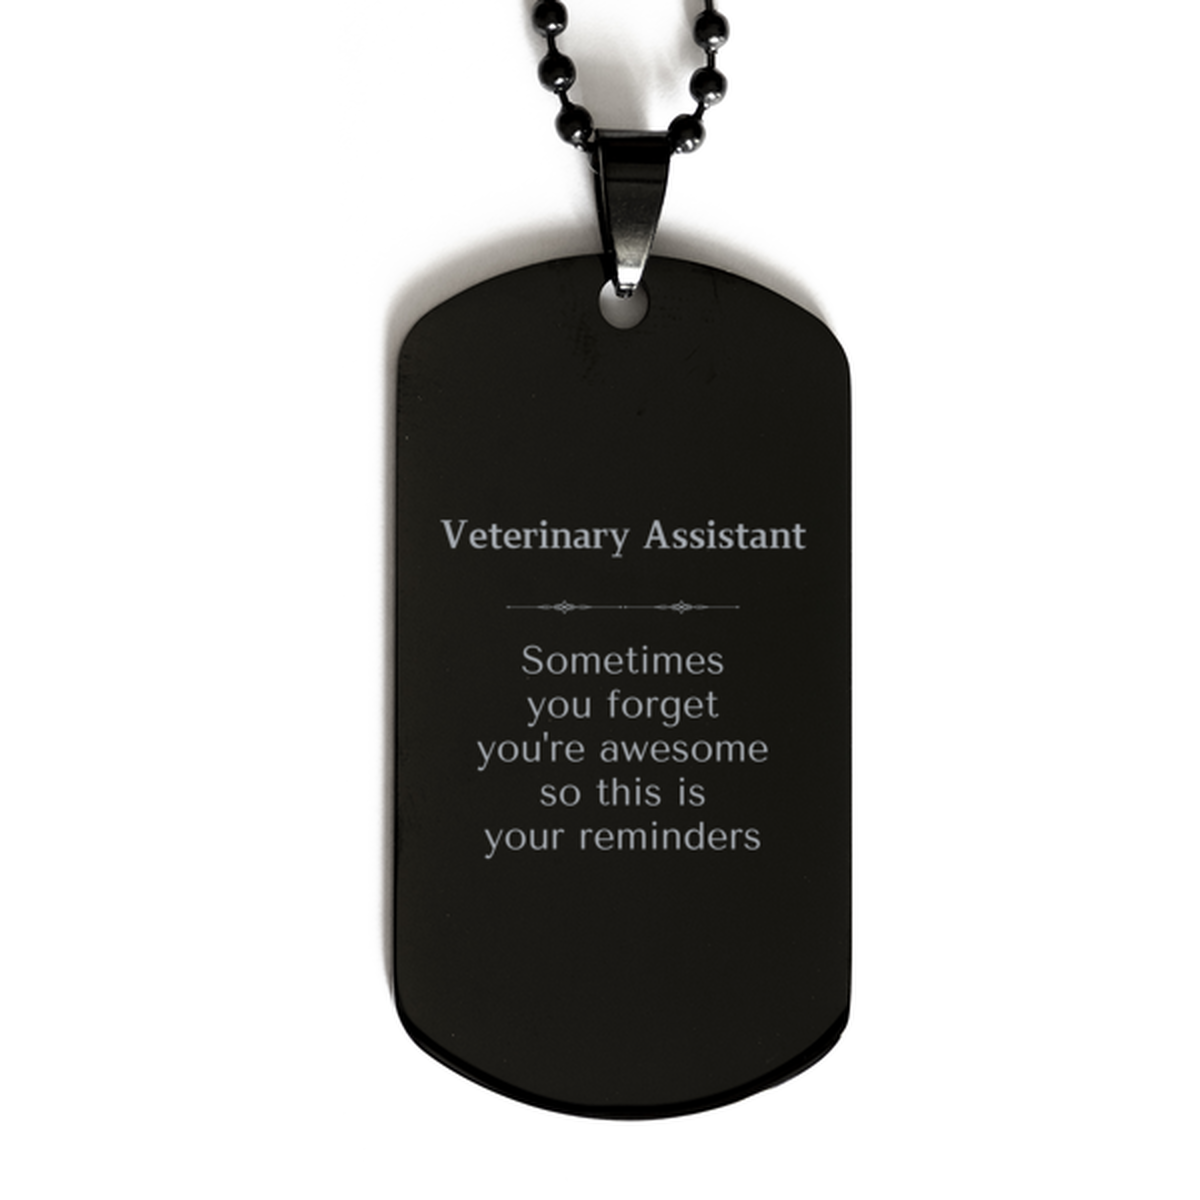 Sentimental Veterinary Assistant Black Dog Tag, Veterinary Assistant Sometimes you forget you're awesome so this is your reminders, Graduation Christmas Birthday Gifts for Veterinary Assistant, Men, Women, Coworkers